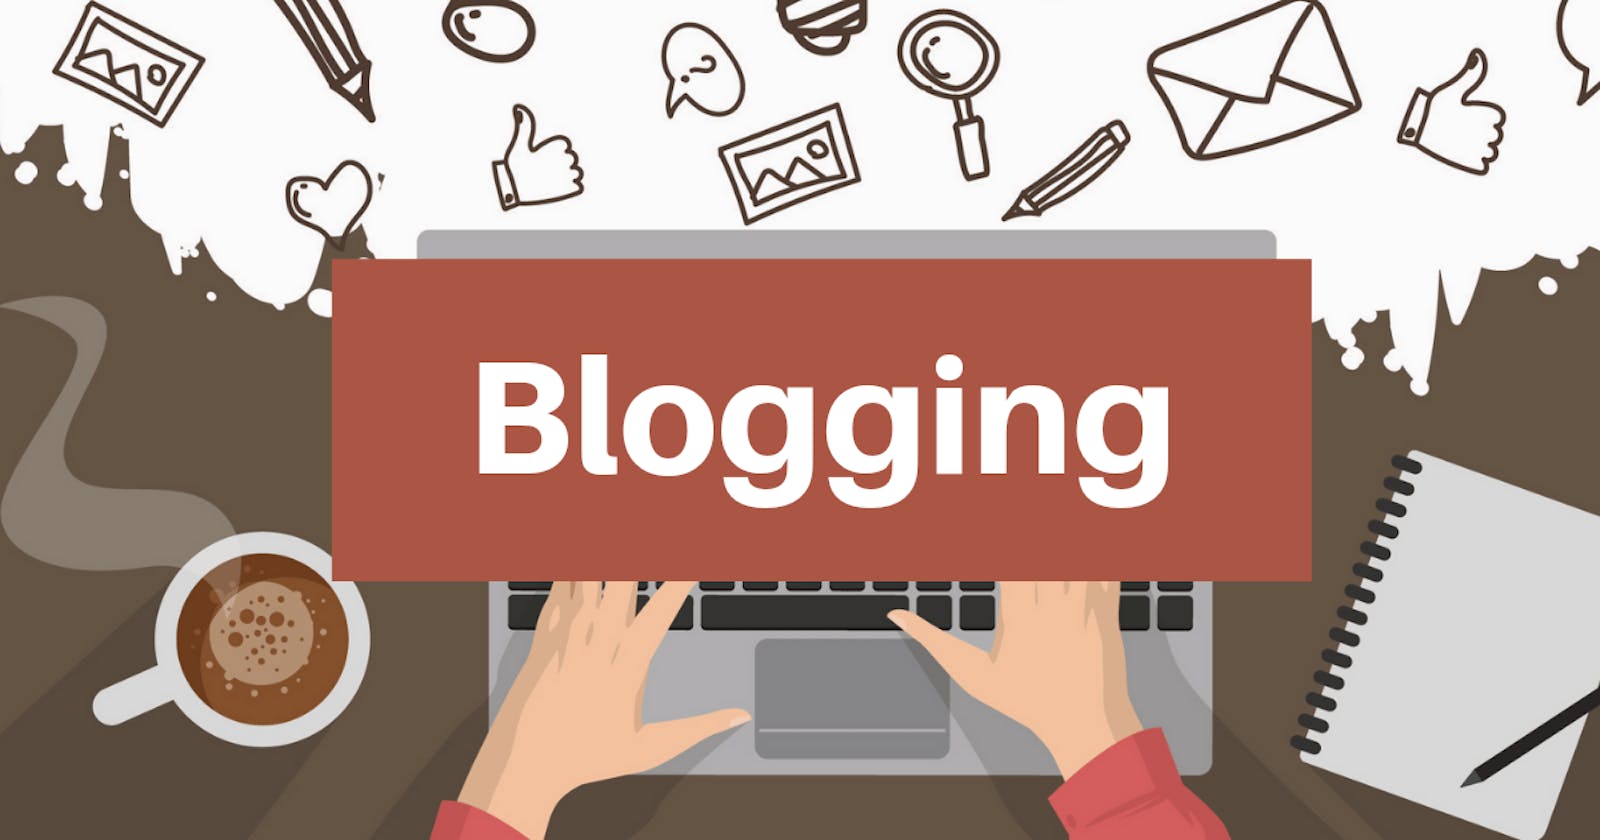 Do You Have Other Blogs?